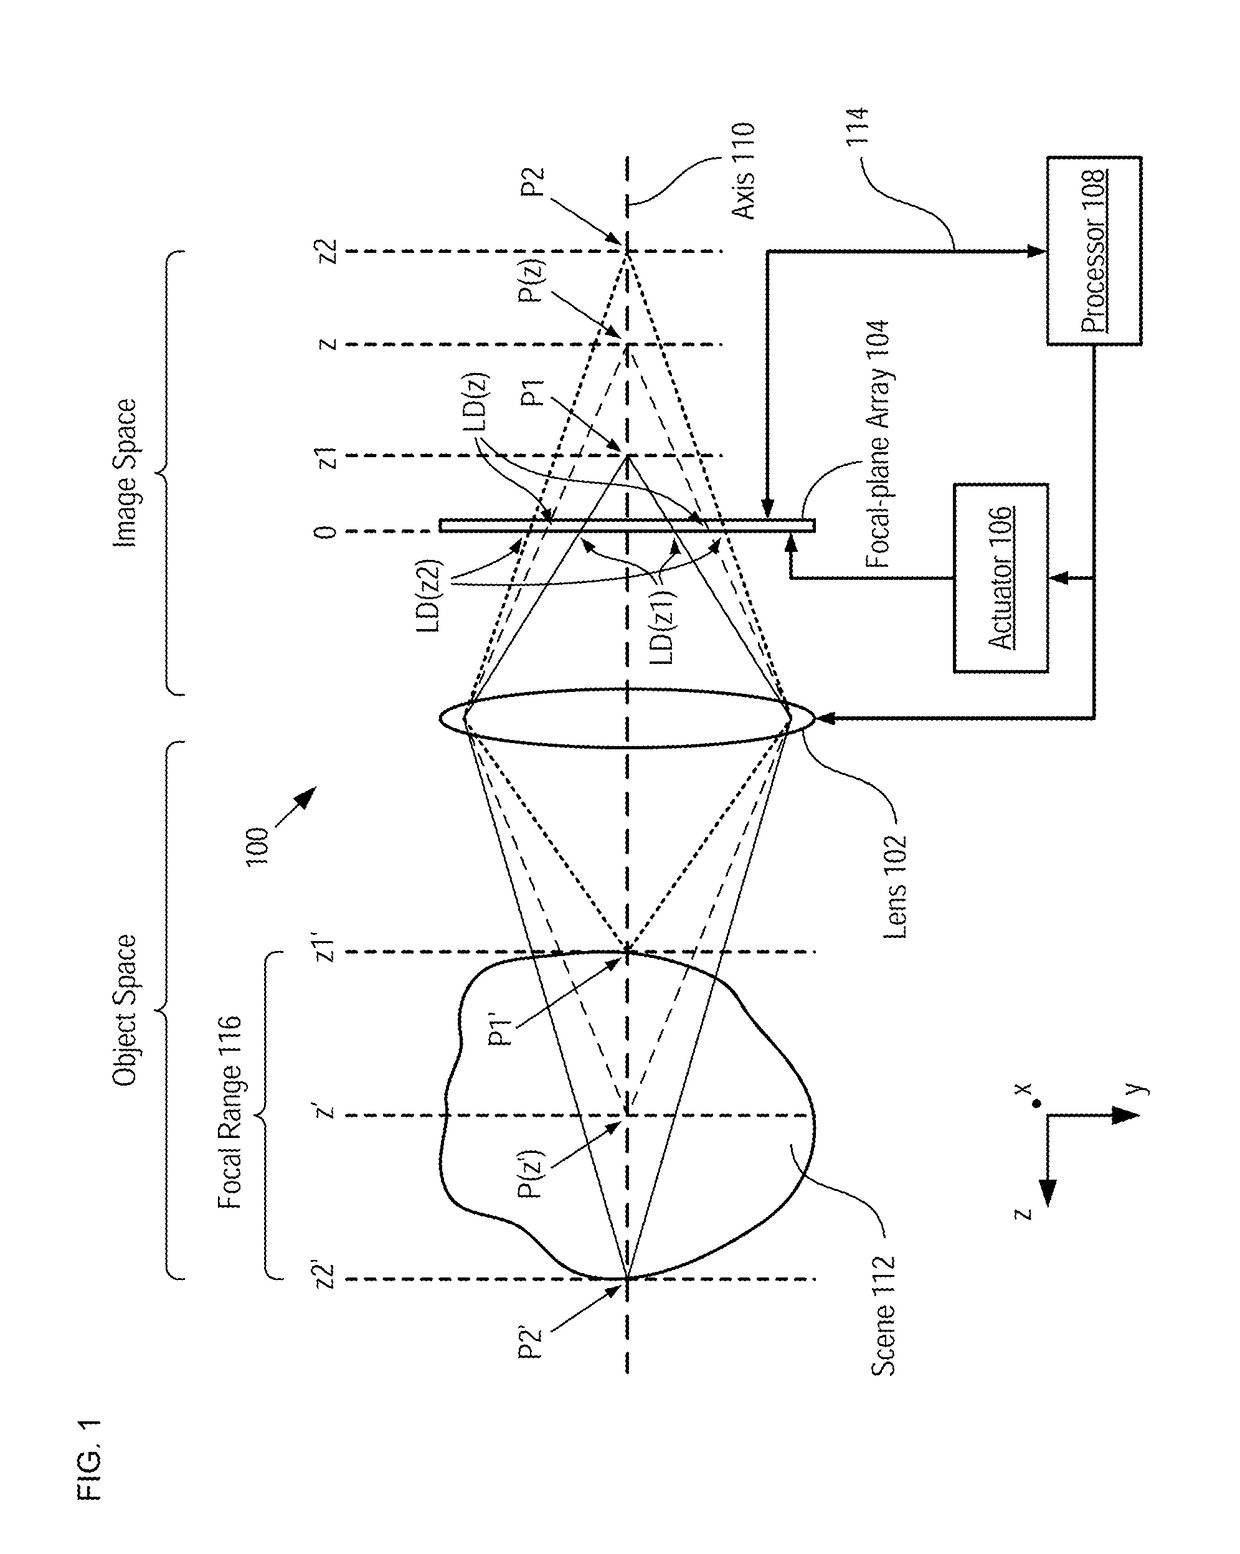 System and method for improved computational imaging